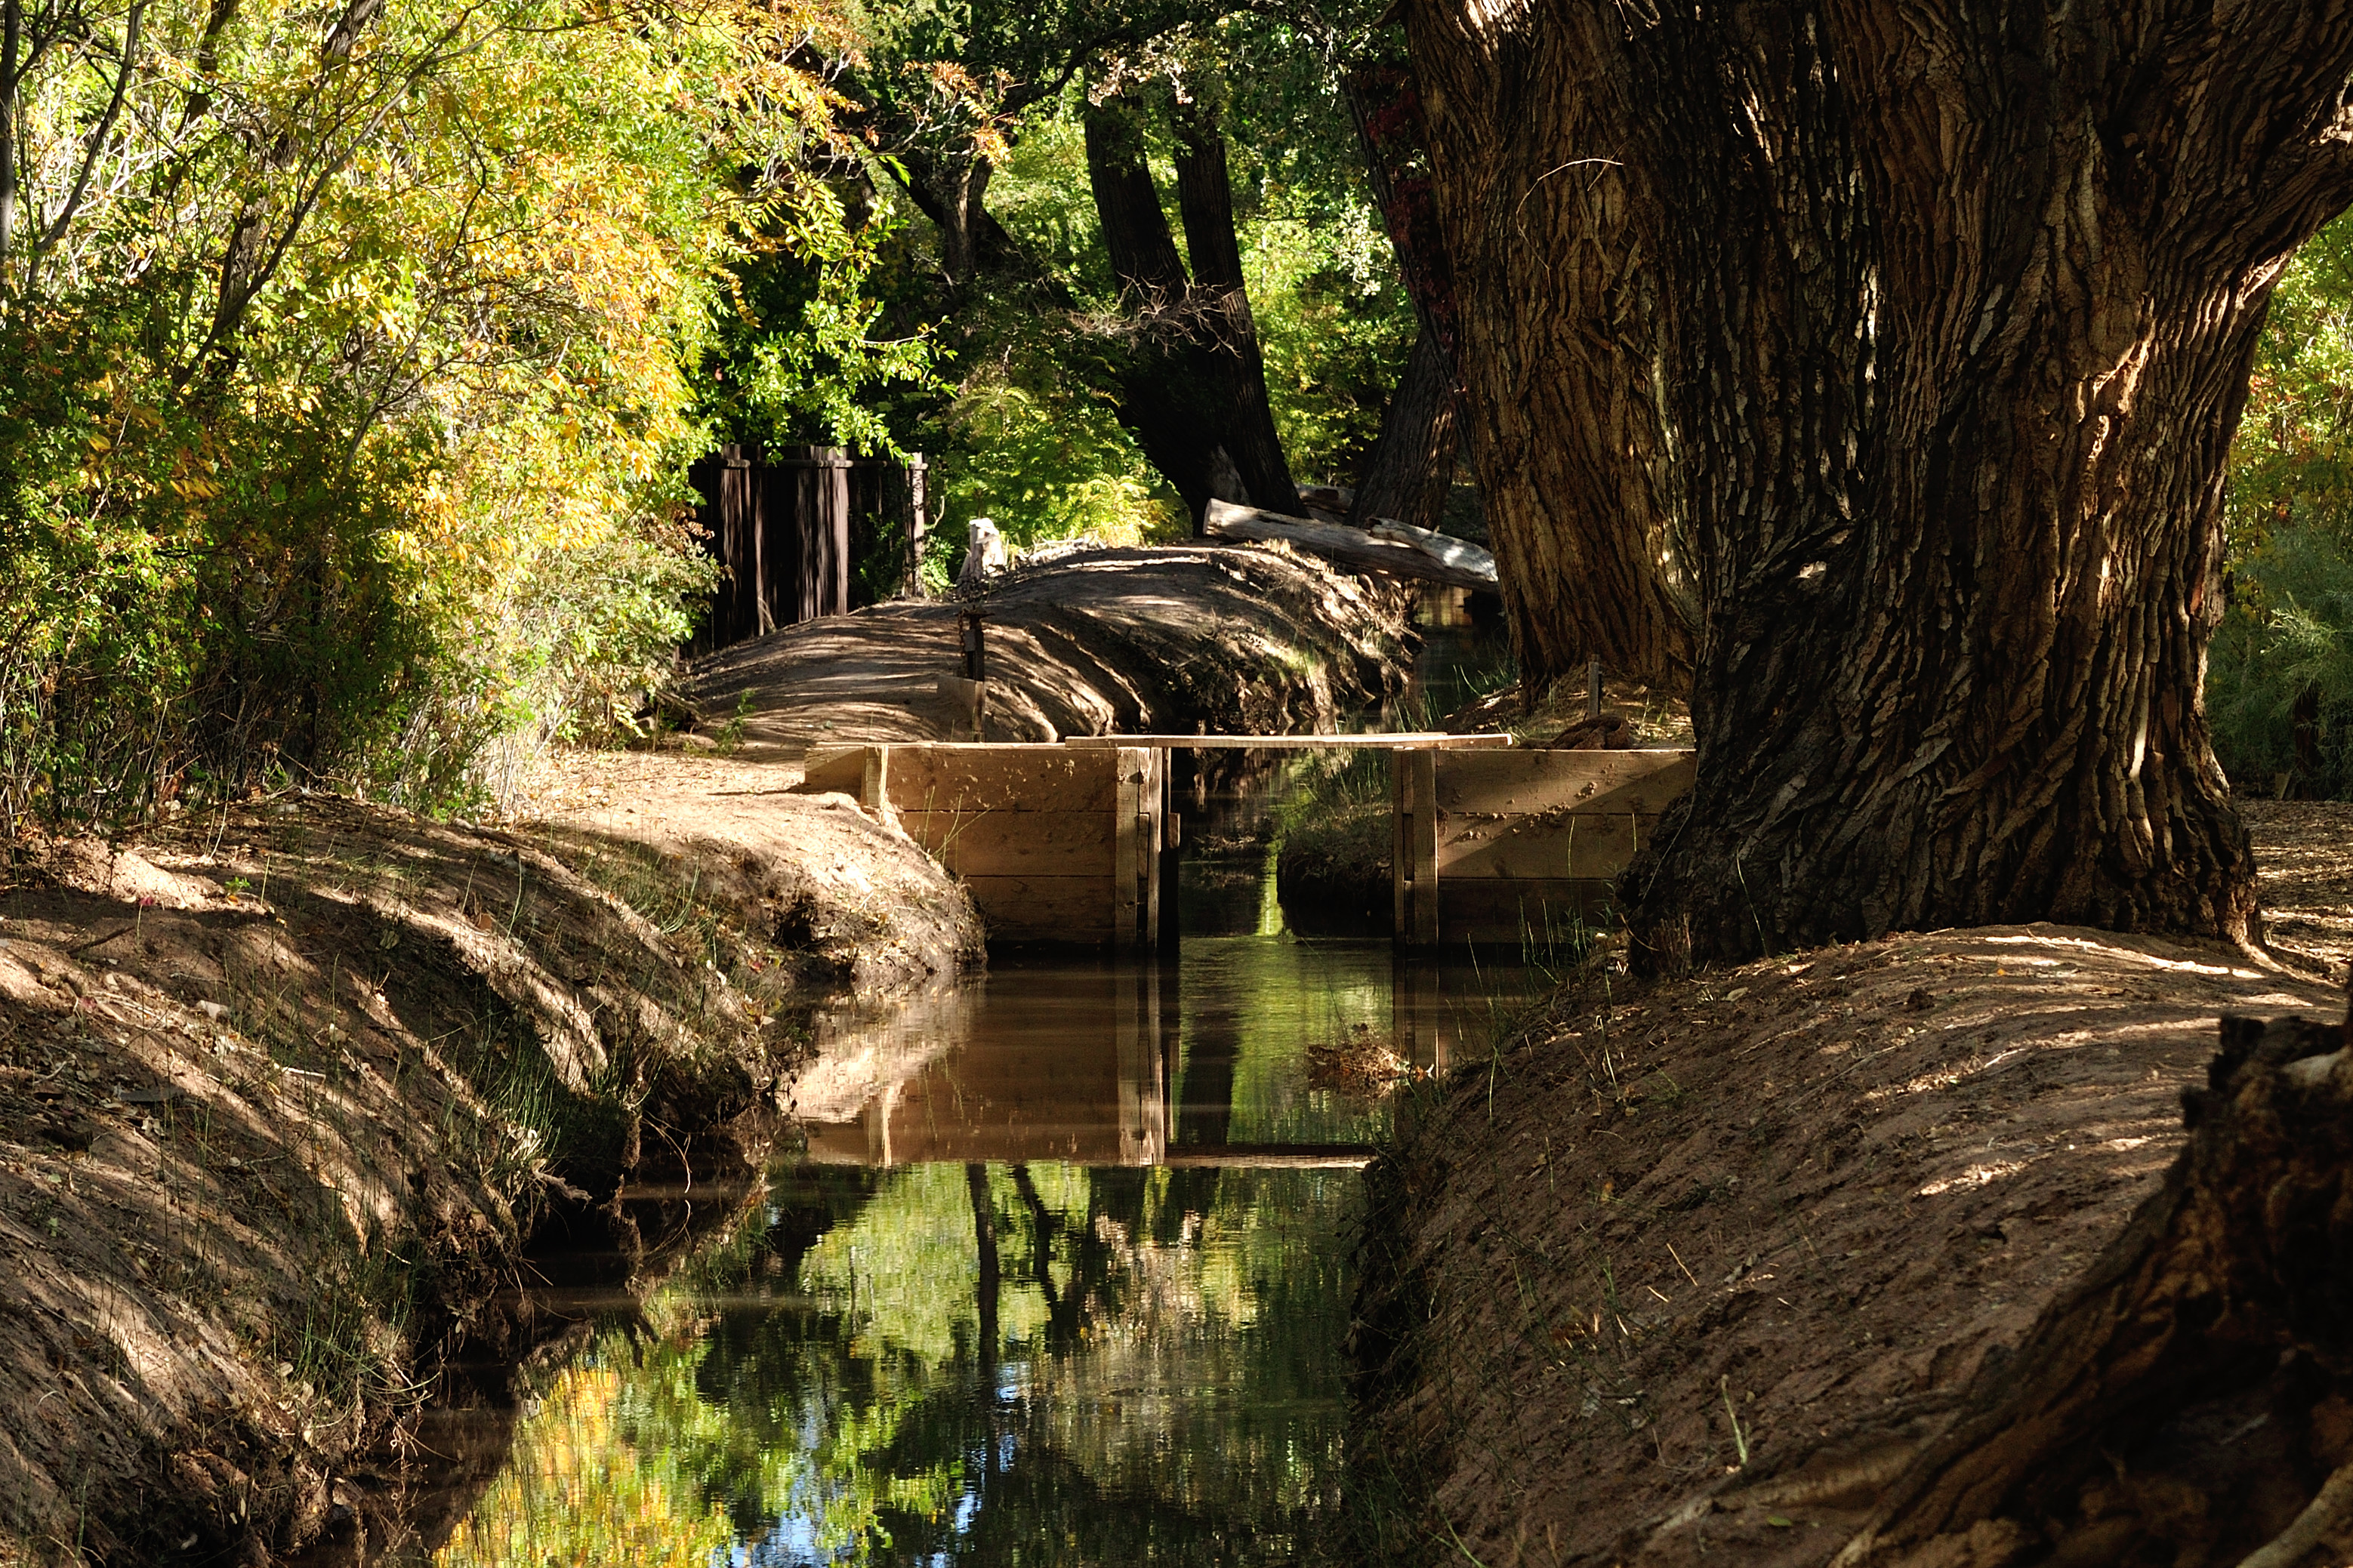 Tree lined trail along the acequia. Photo courtesy of gentleartofwandering.com